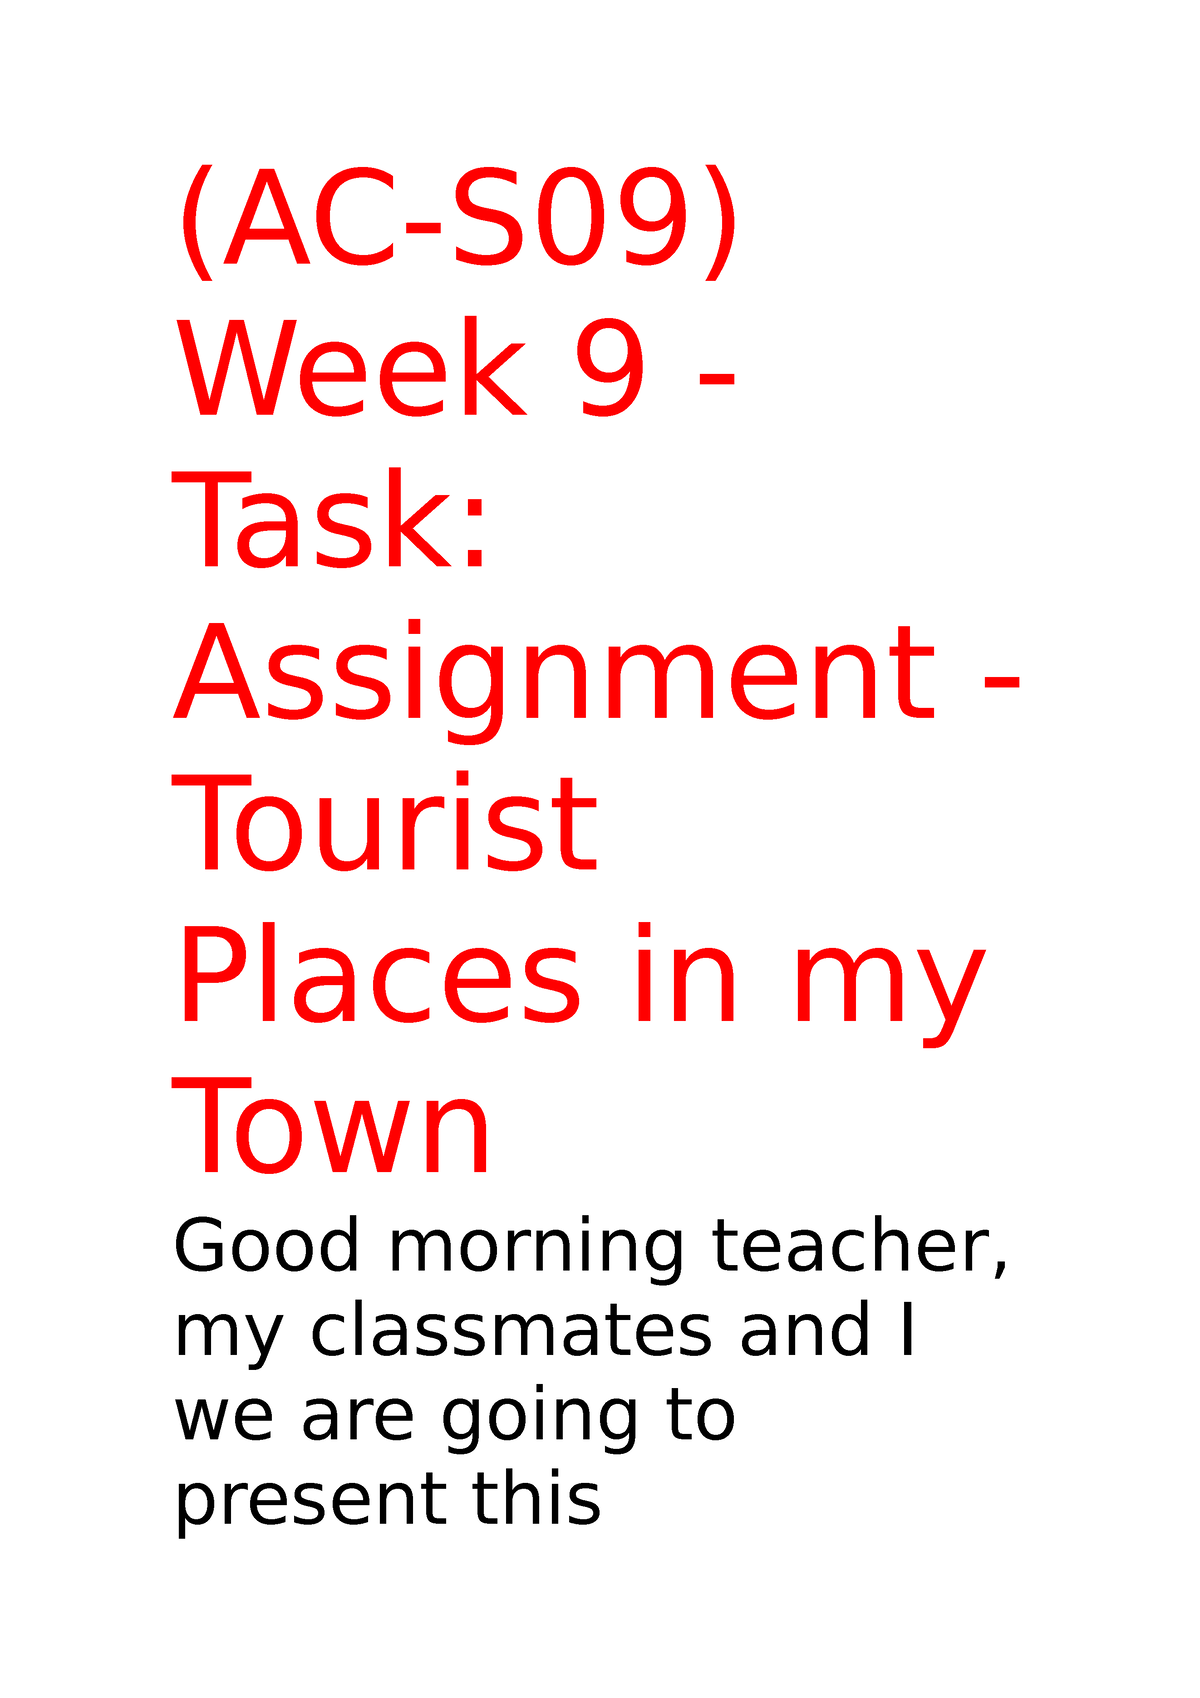 week 9 task assignment tourist places in my town